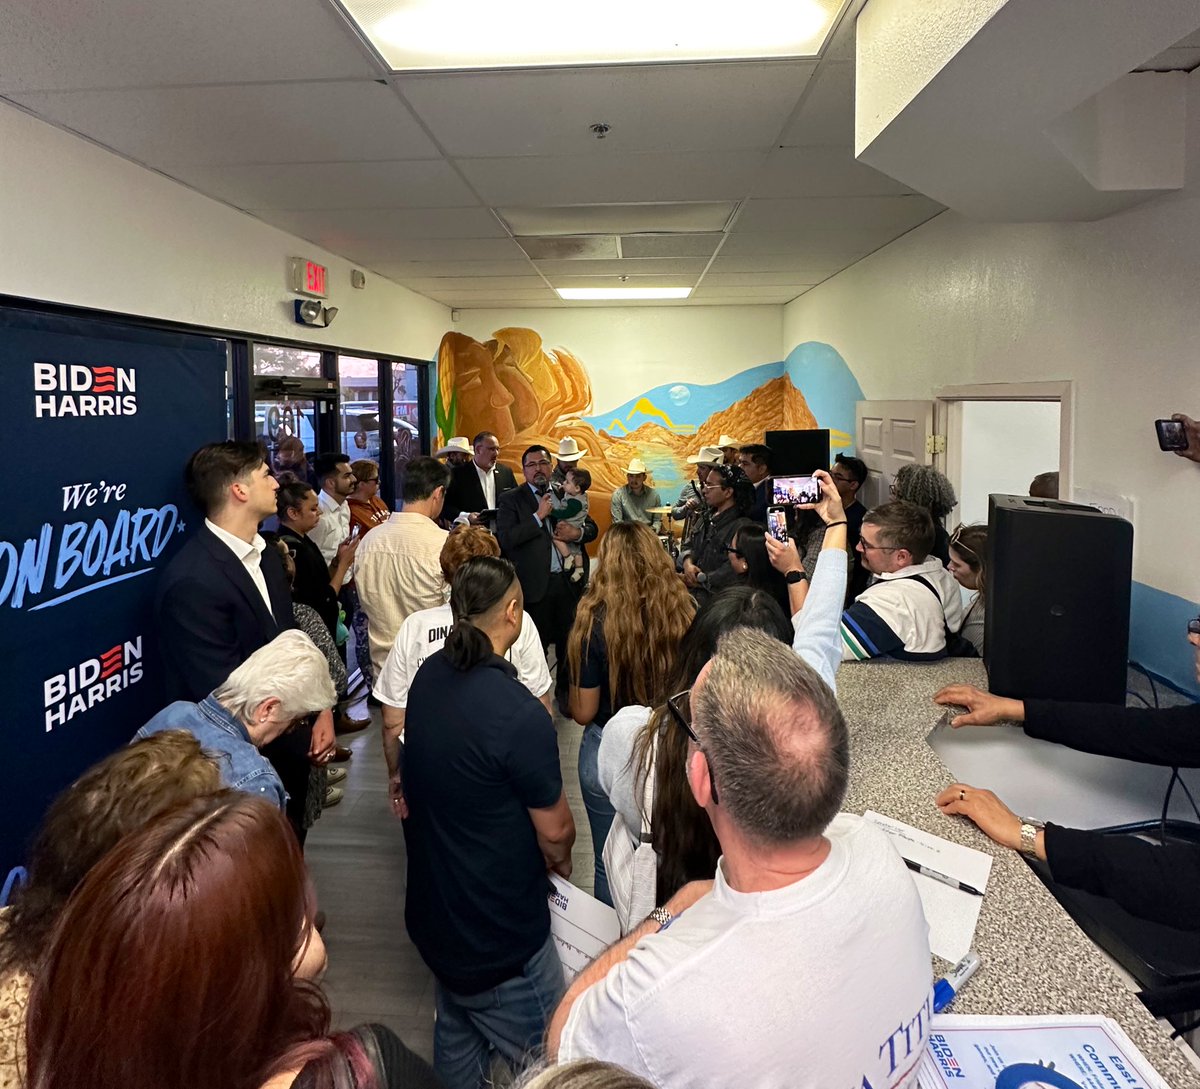 *Packed house at the East Las Vegas Field Office Opening* Senator @EdgarFloresNV getting things kicked off: “Look around. This is what we are fighting for.”